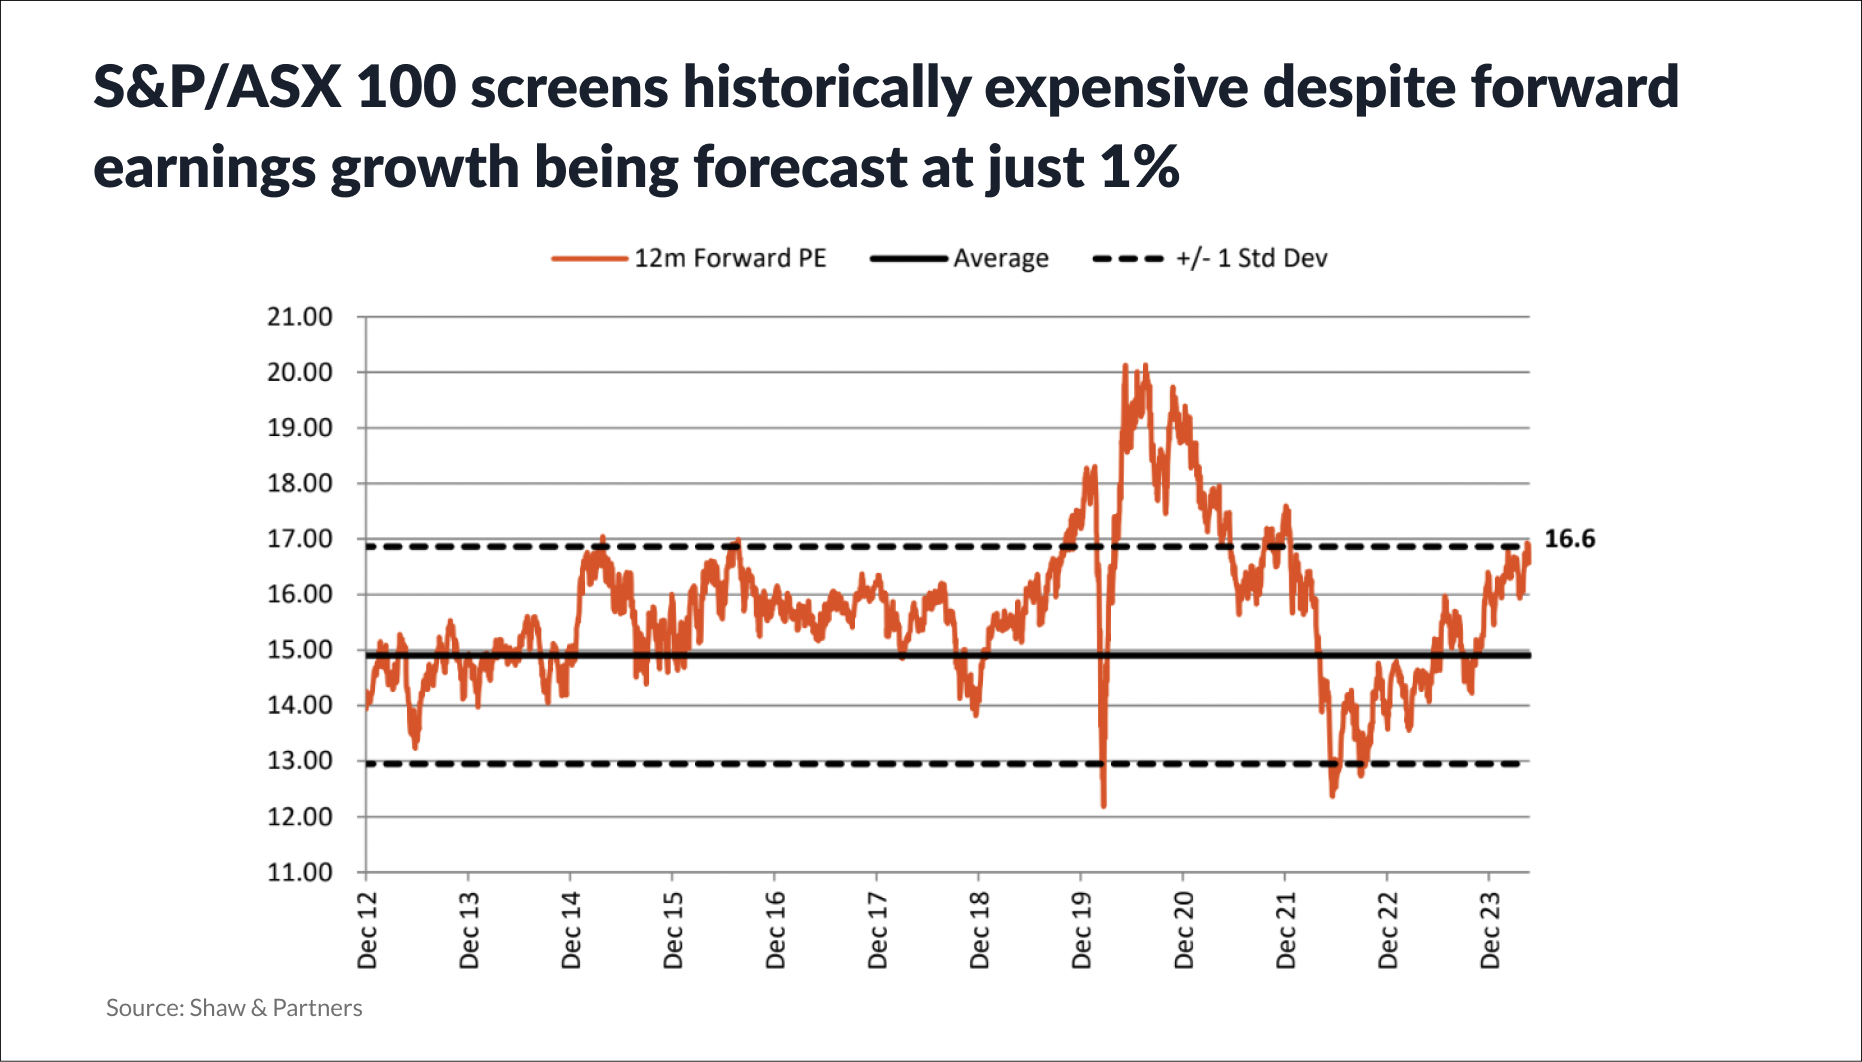 ASX 100 screens historically expensive despite forward earnings growth being forecast at just 1-